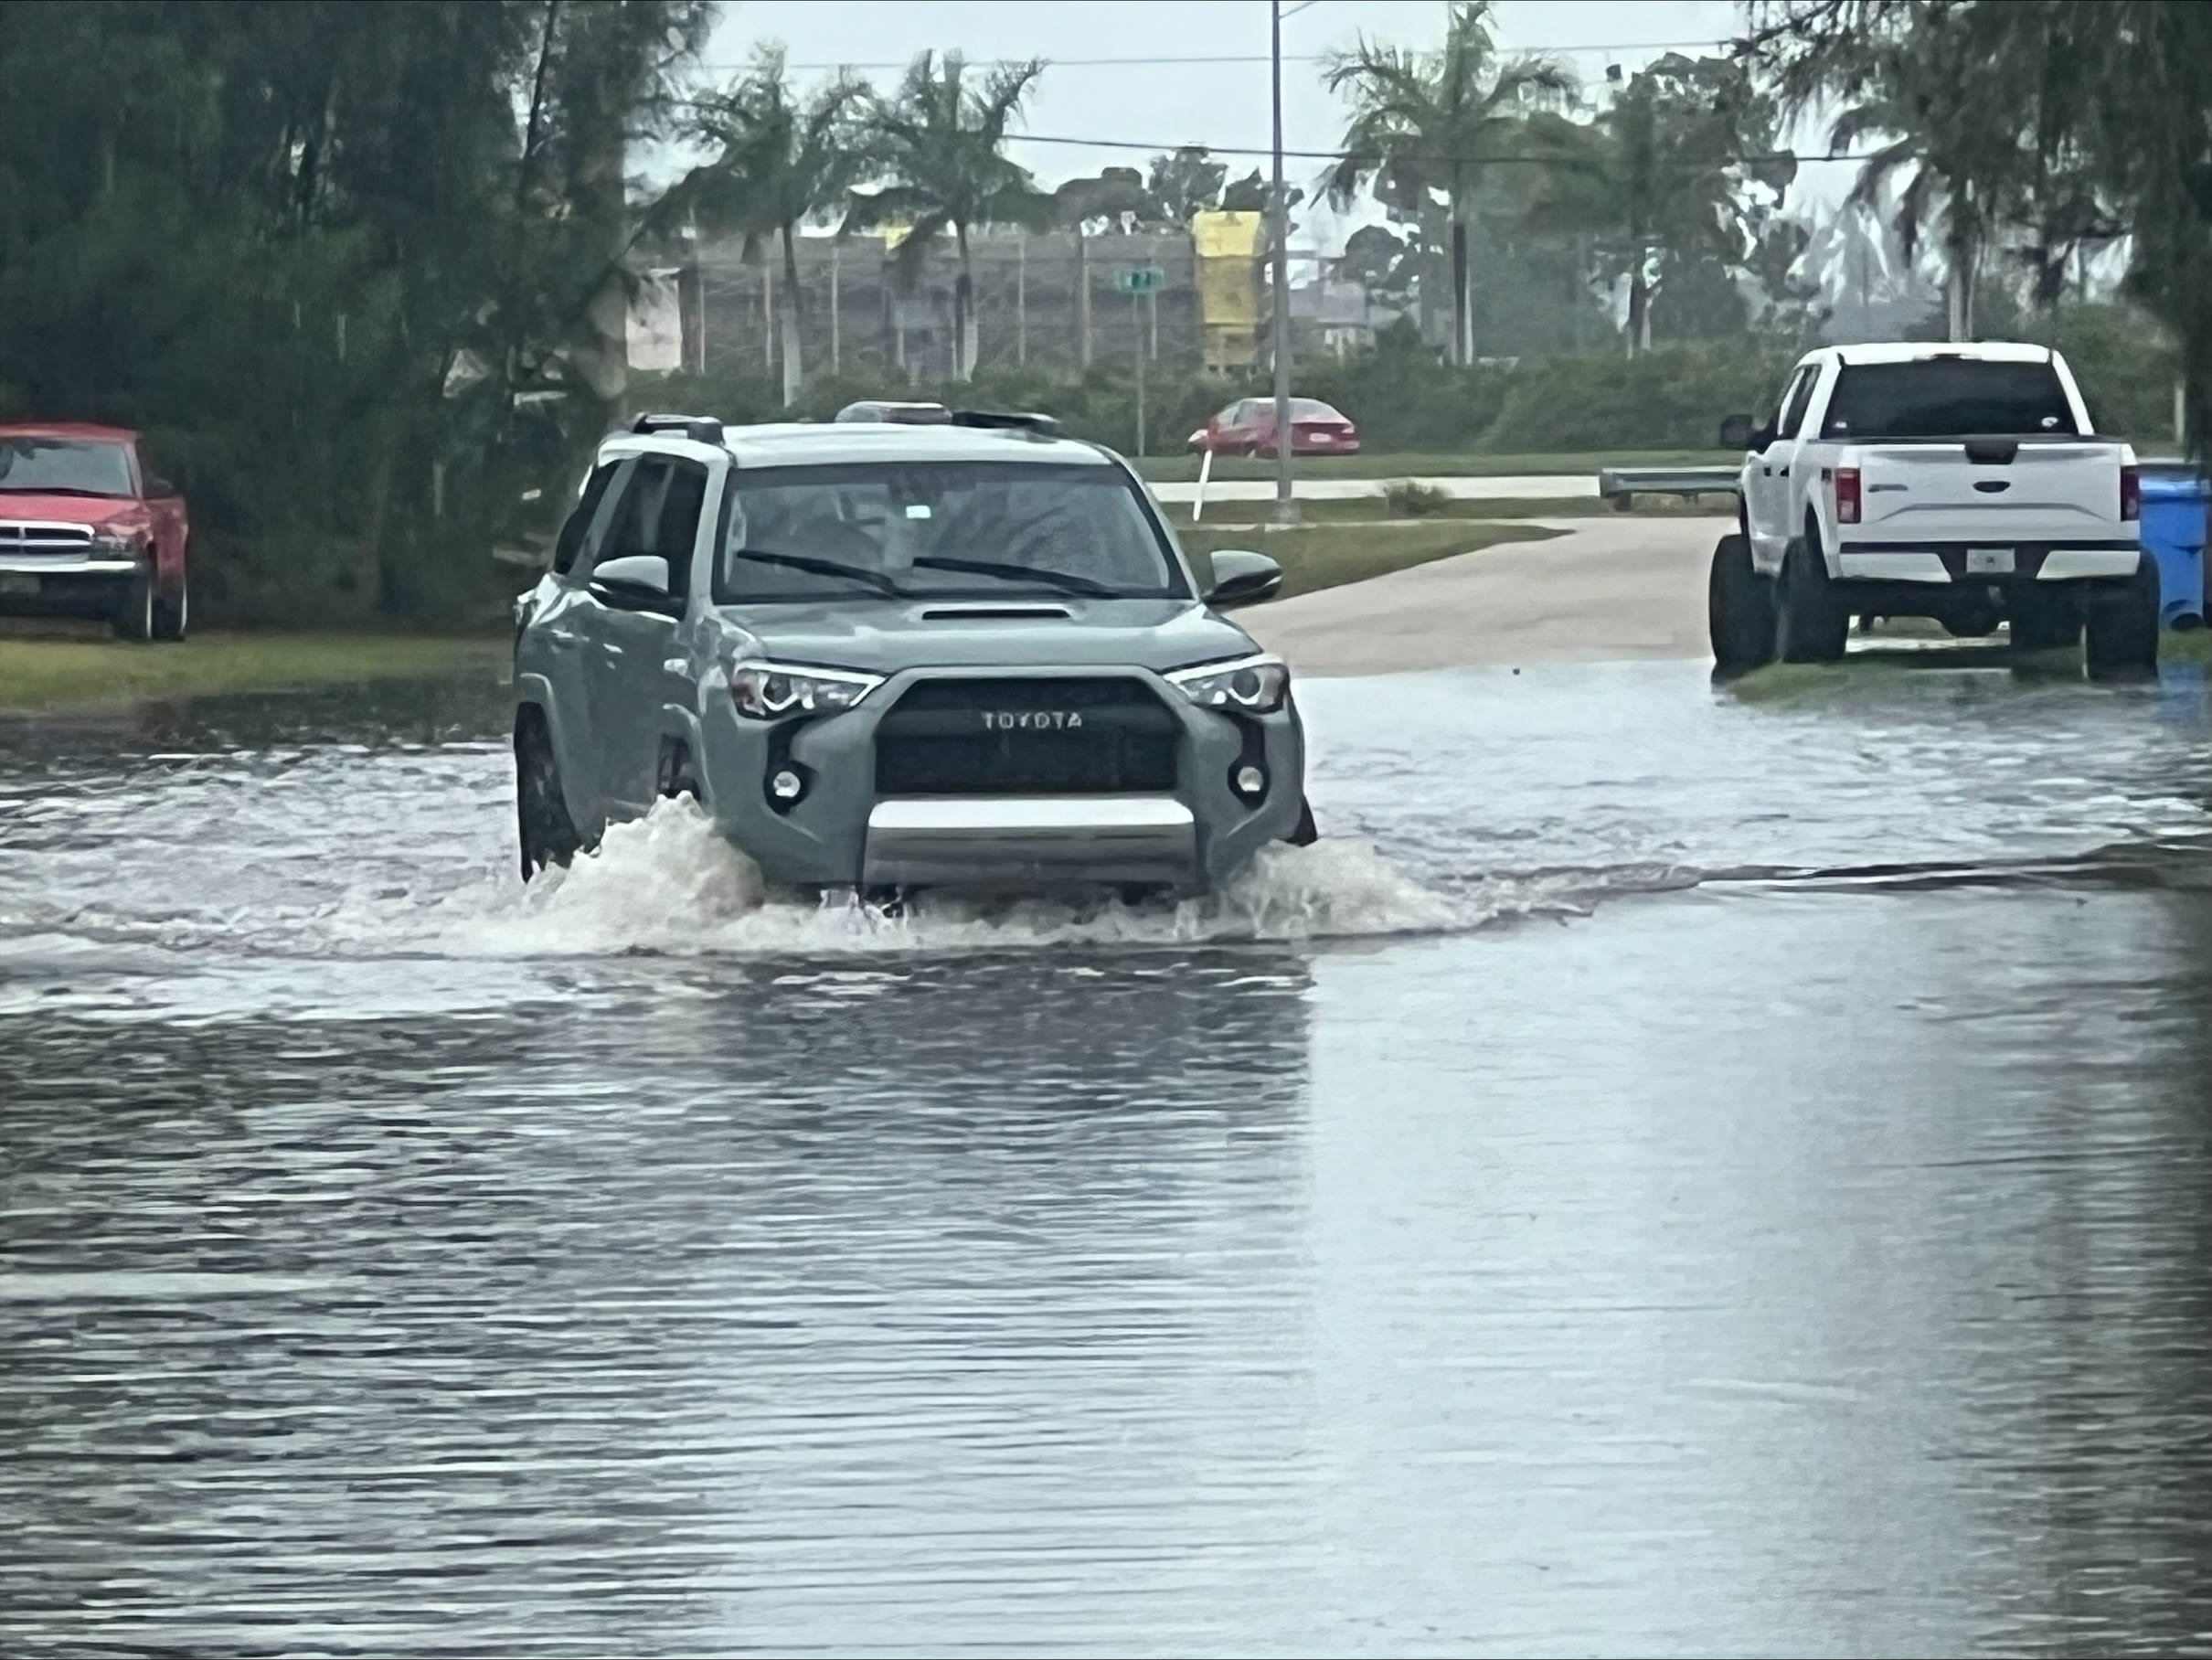 Cape Coral flooding hot spots and advice to steer clear of trouble